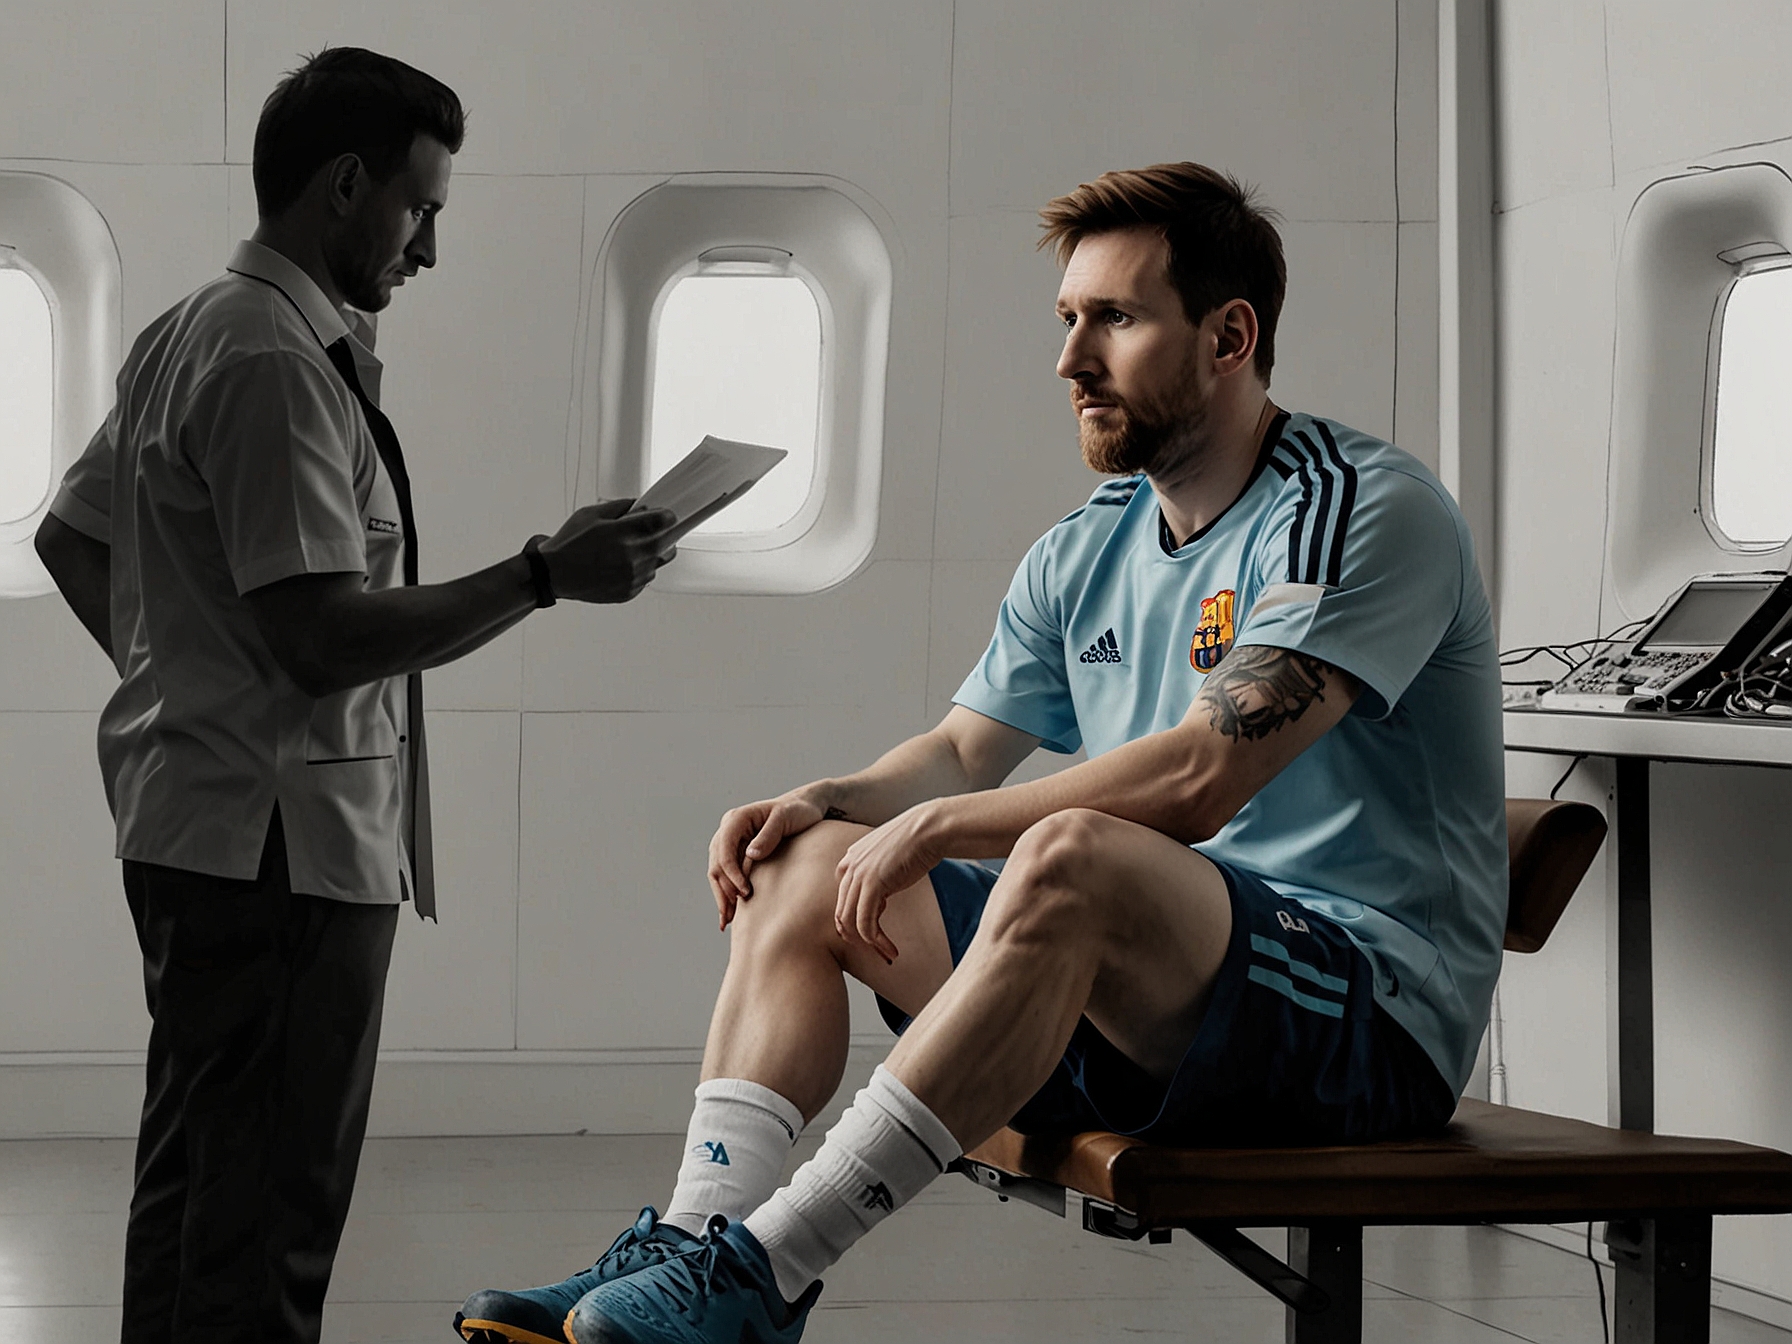 Lionel Messi sitting on the sidelines with a medical staff attending to his right leg, capturing the star player's moment of rest and recovery, emphasizing the importance of his well-being.